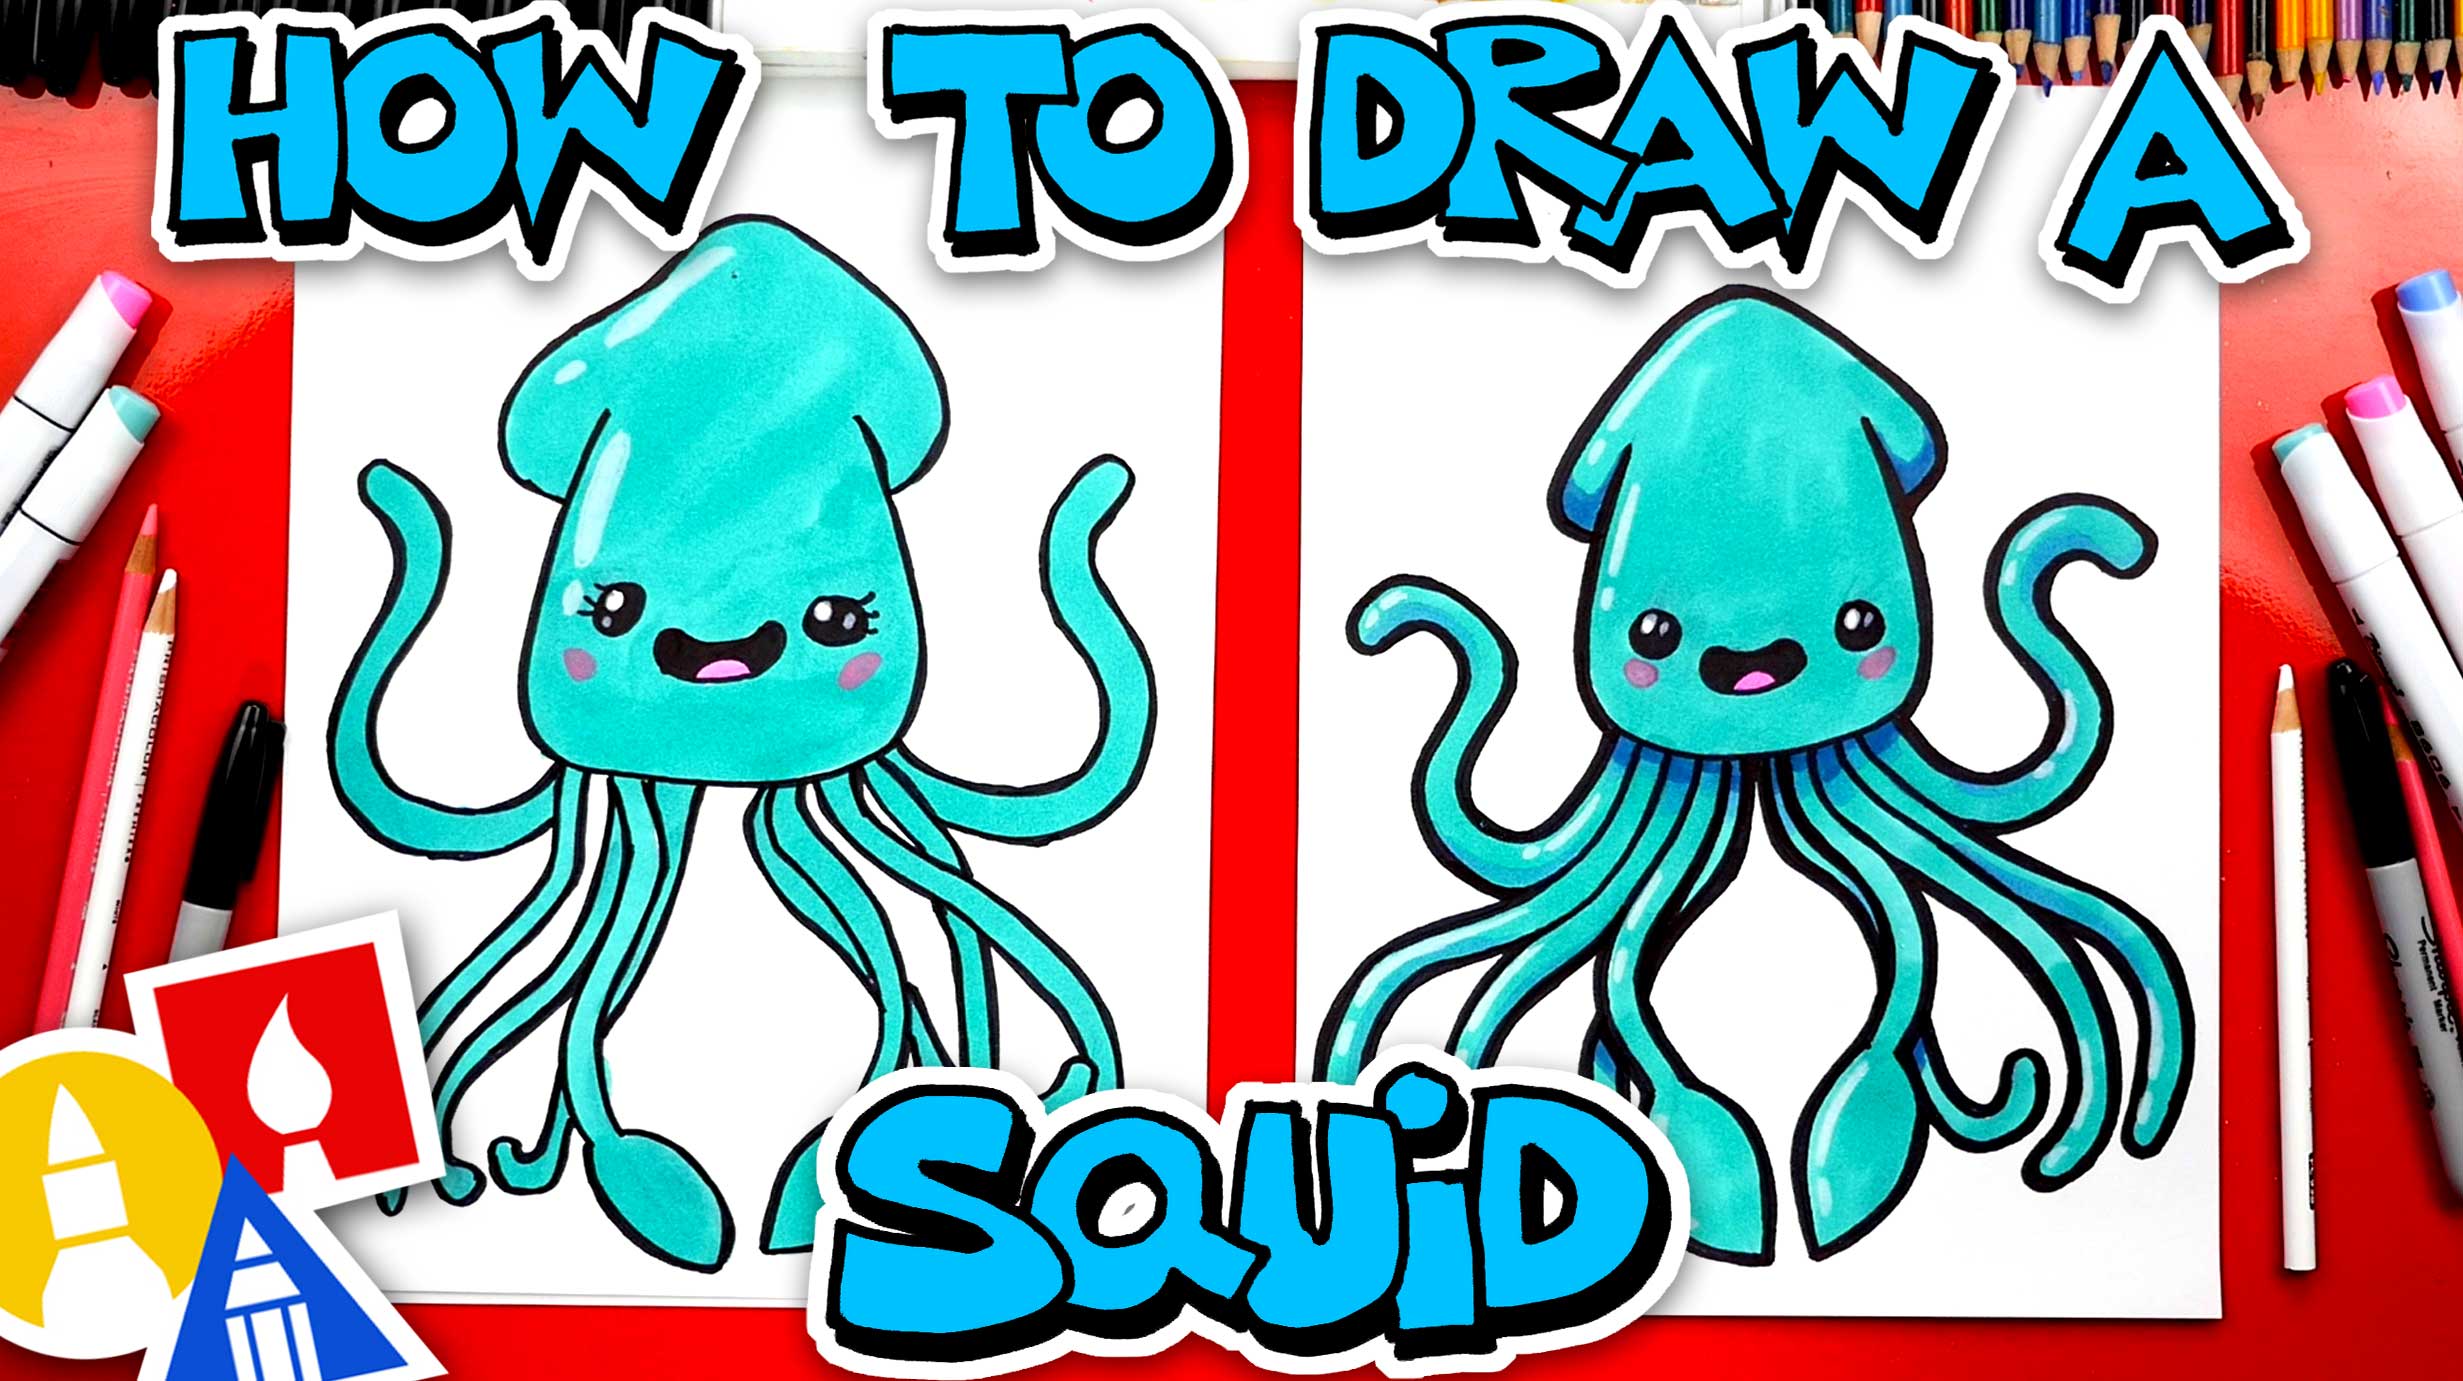 How To Draw Abc For Kids / How To Draw An Axolotl Ocean Art For